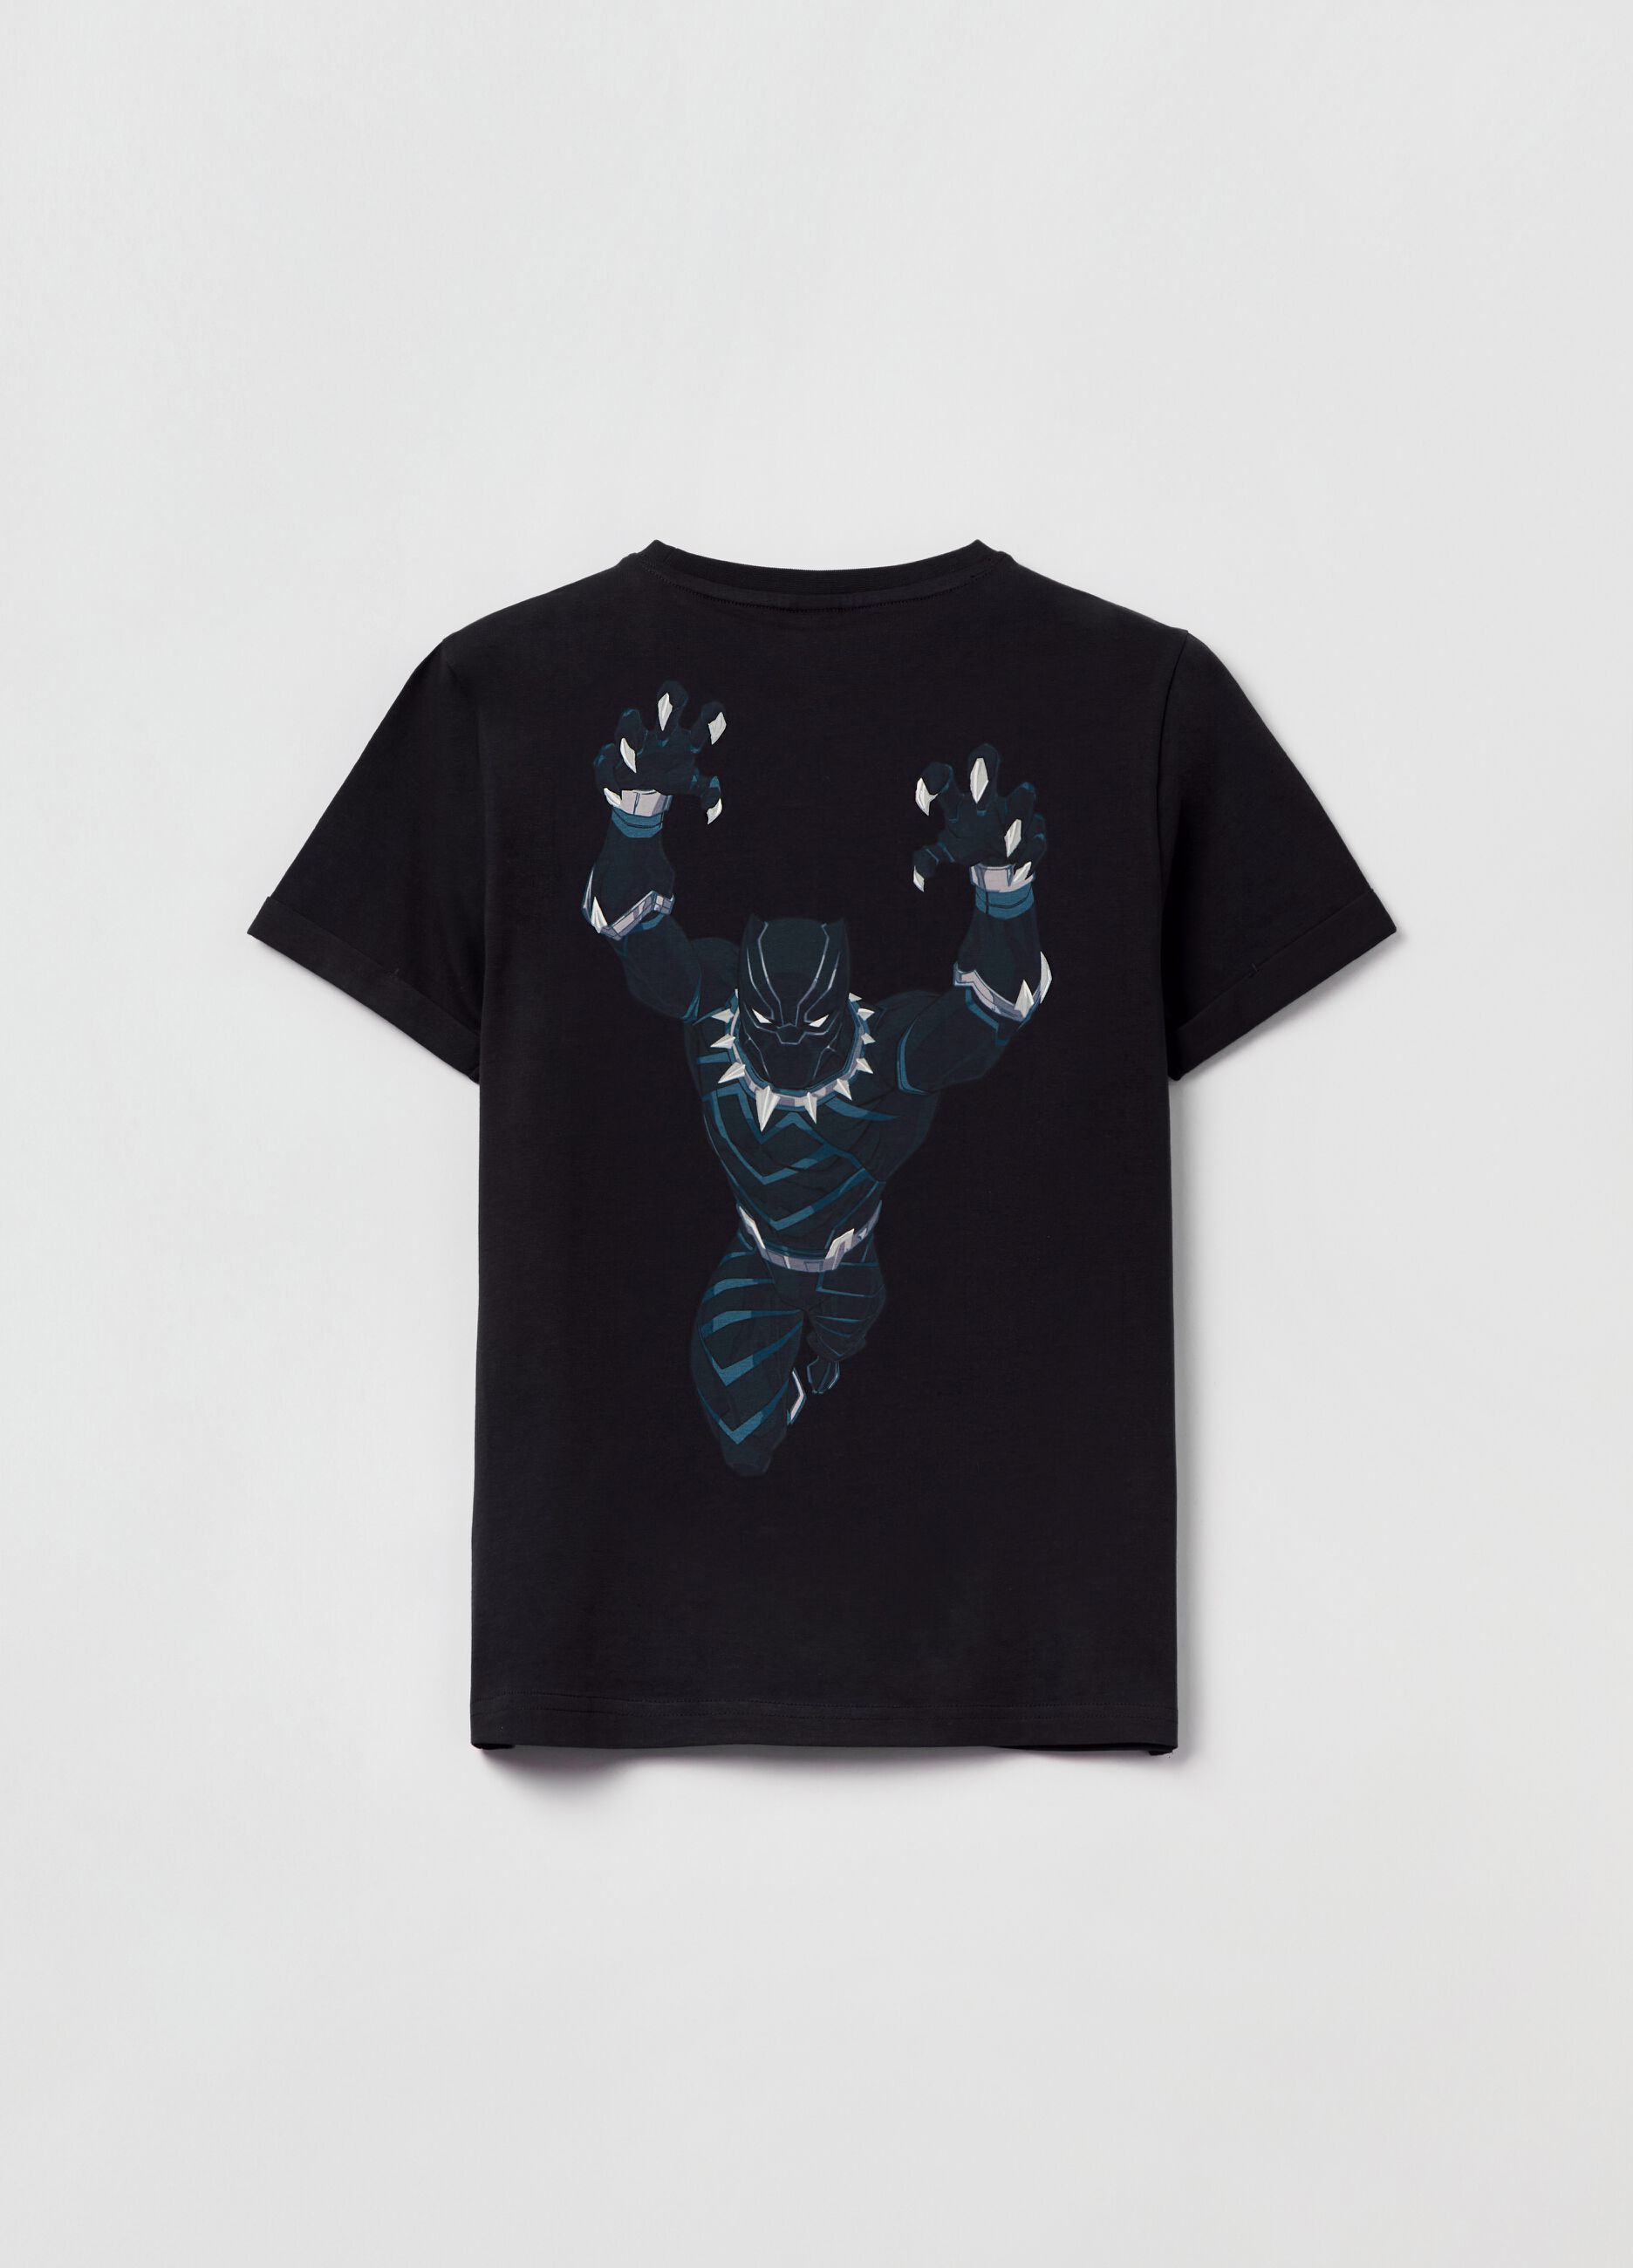 Marvel Black Panther T-shirt in cotton